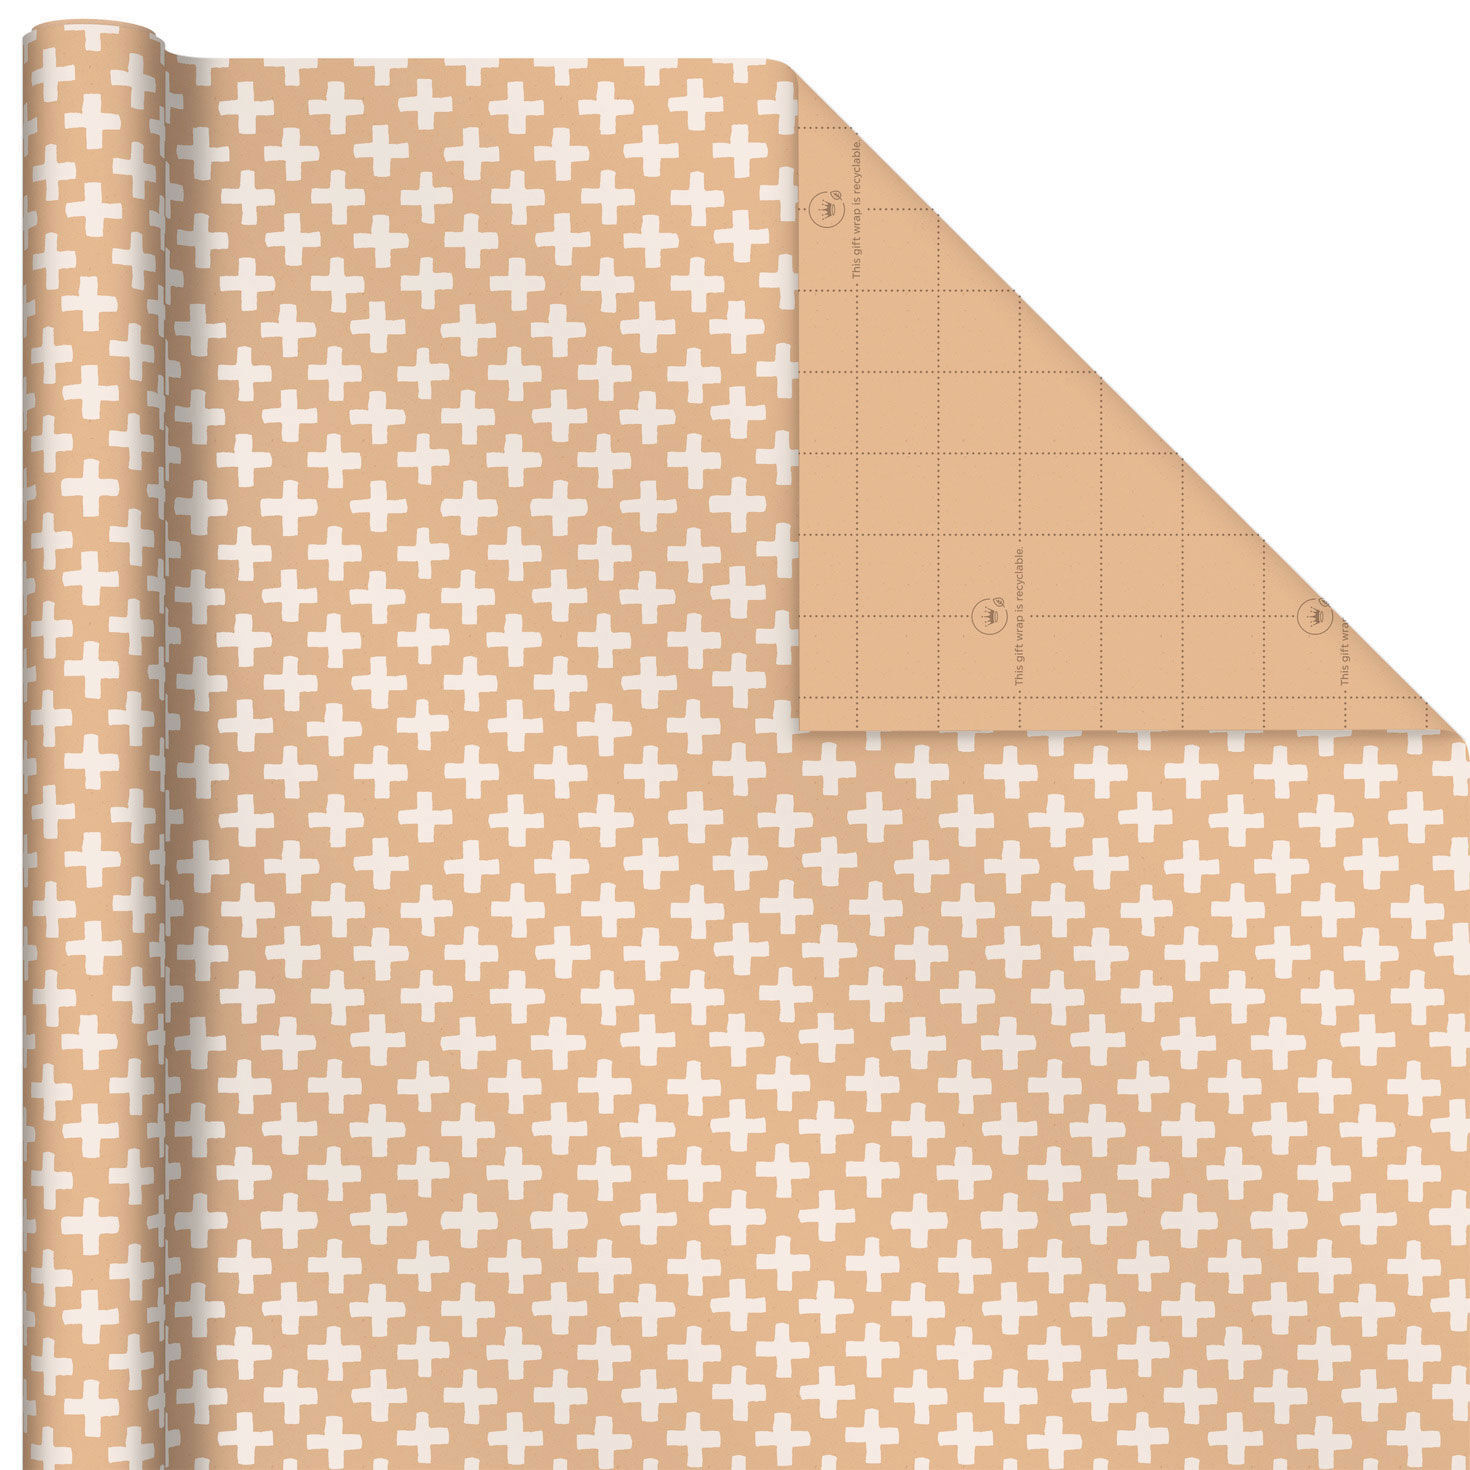 Plus Sign Kraft Wrapping Paper, 17.5 sq. ft. - Wrapping Paper